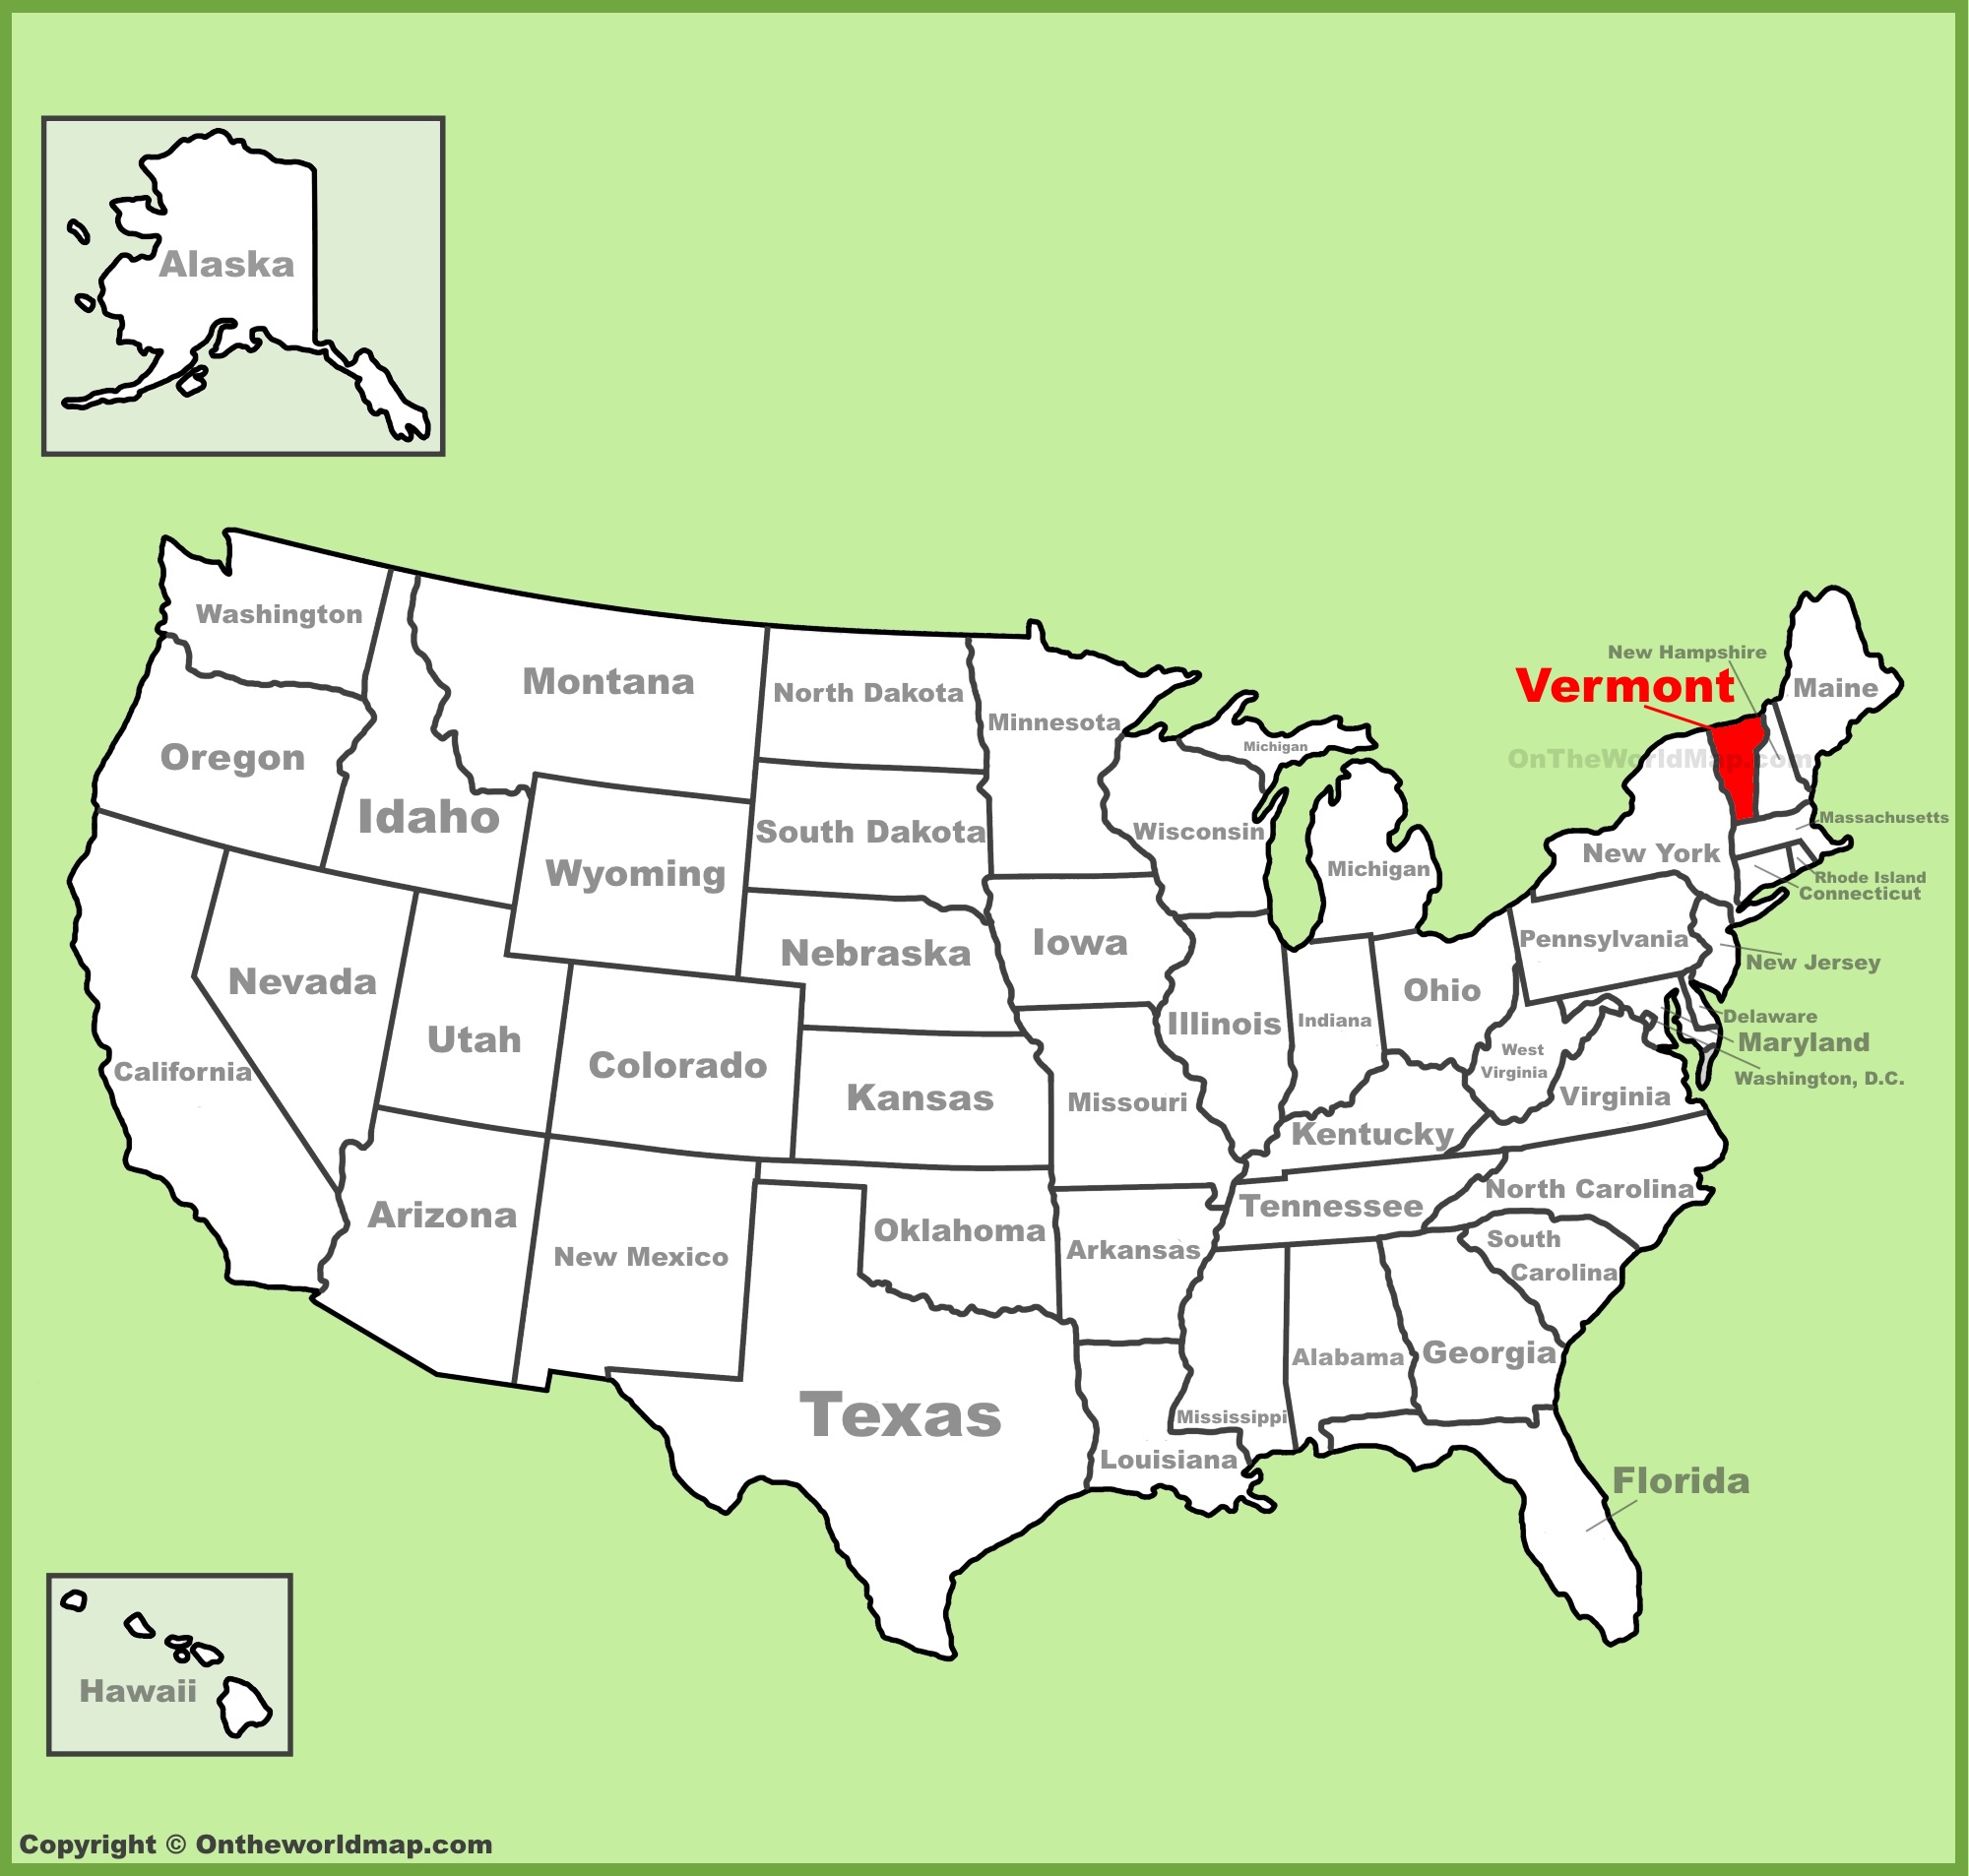 Vermont Location On The U S Map